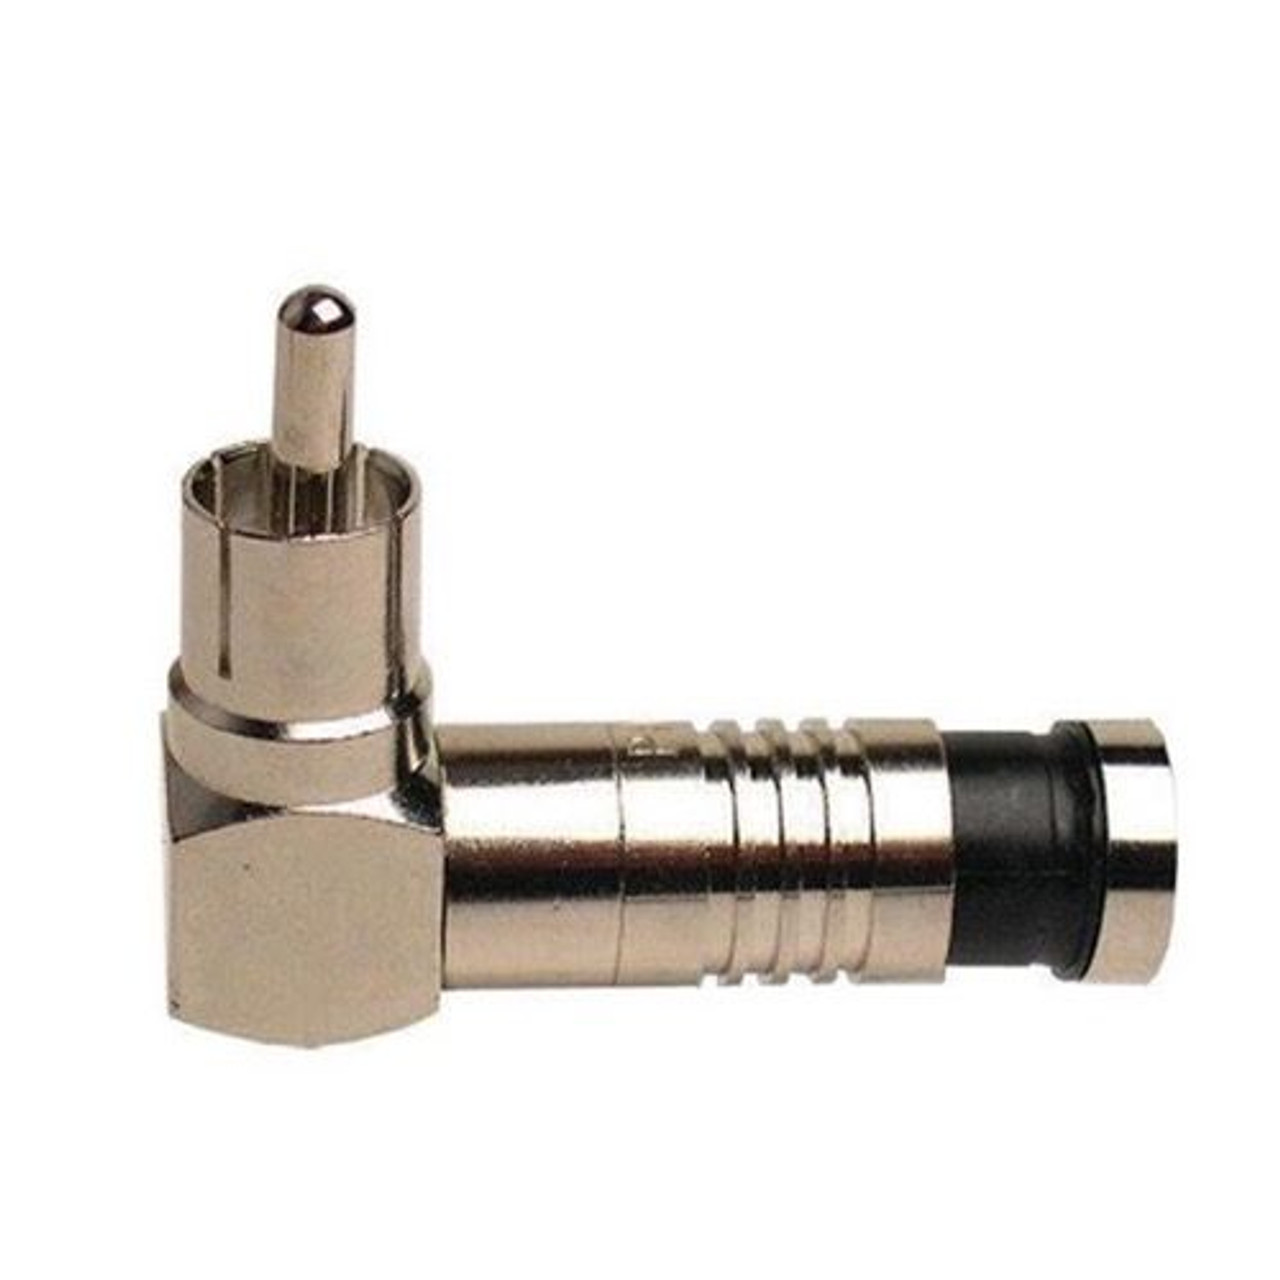 Vanco RCA RG6 Compression Connector Right Angle Male 90 Degree Permaseal Coaxial Cable Adapter F to RCA 1 Pack Stereo Cable Connector Audio Video Hook-Up